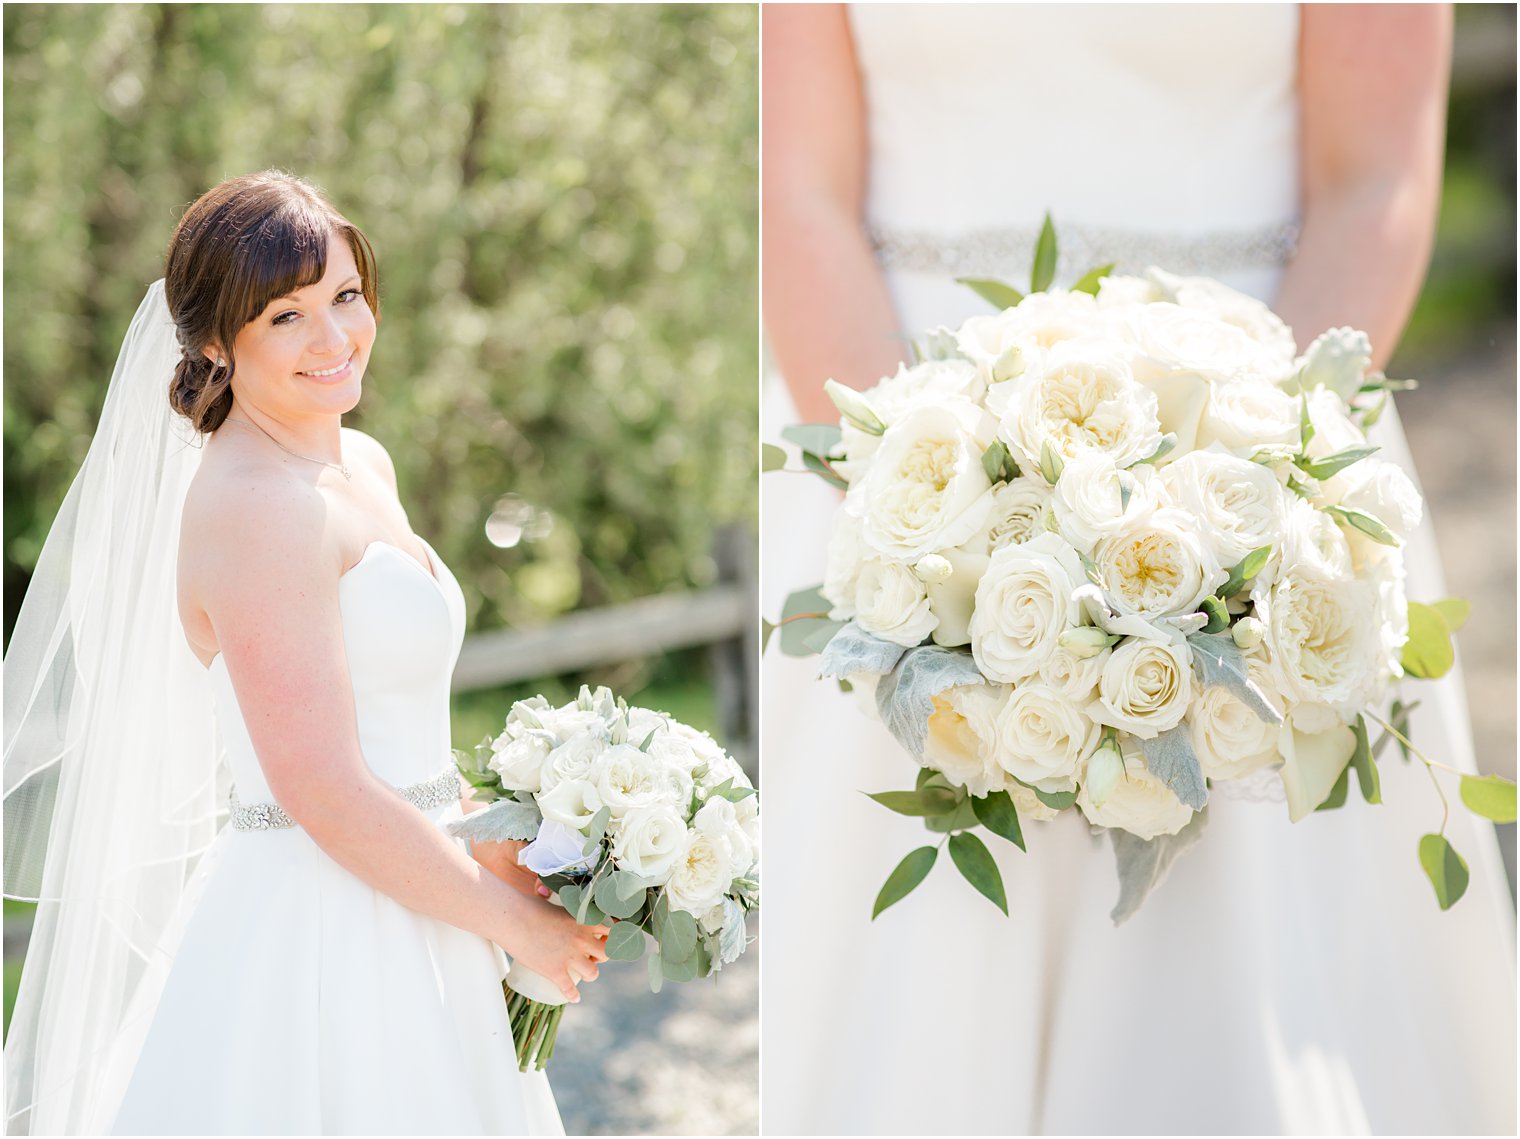 Photos of bride and bouquet at Windows on the Water at Frogbridge in Millstone NJ